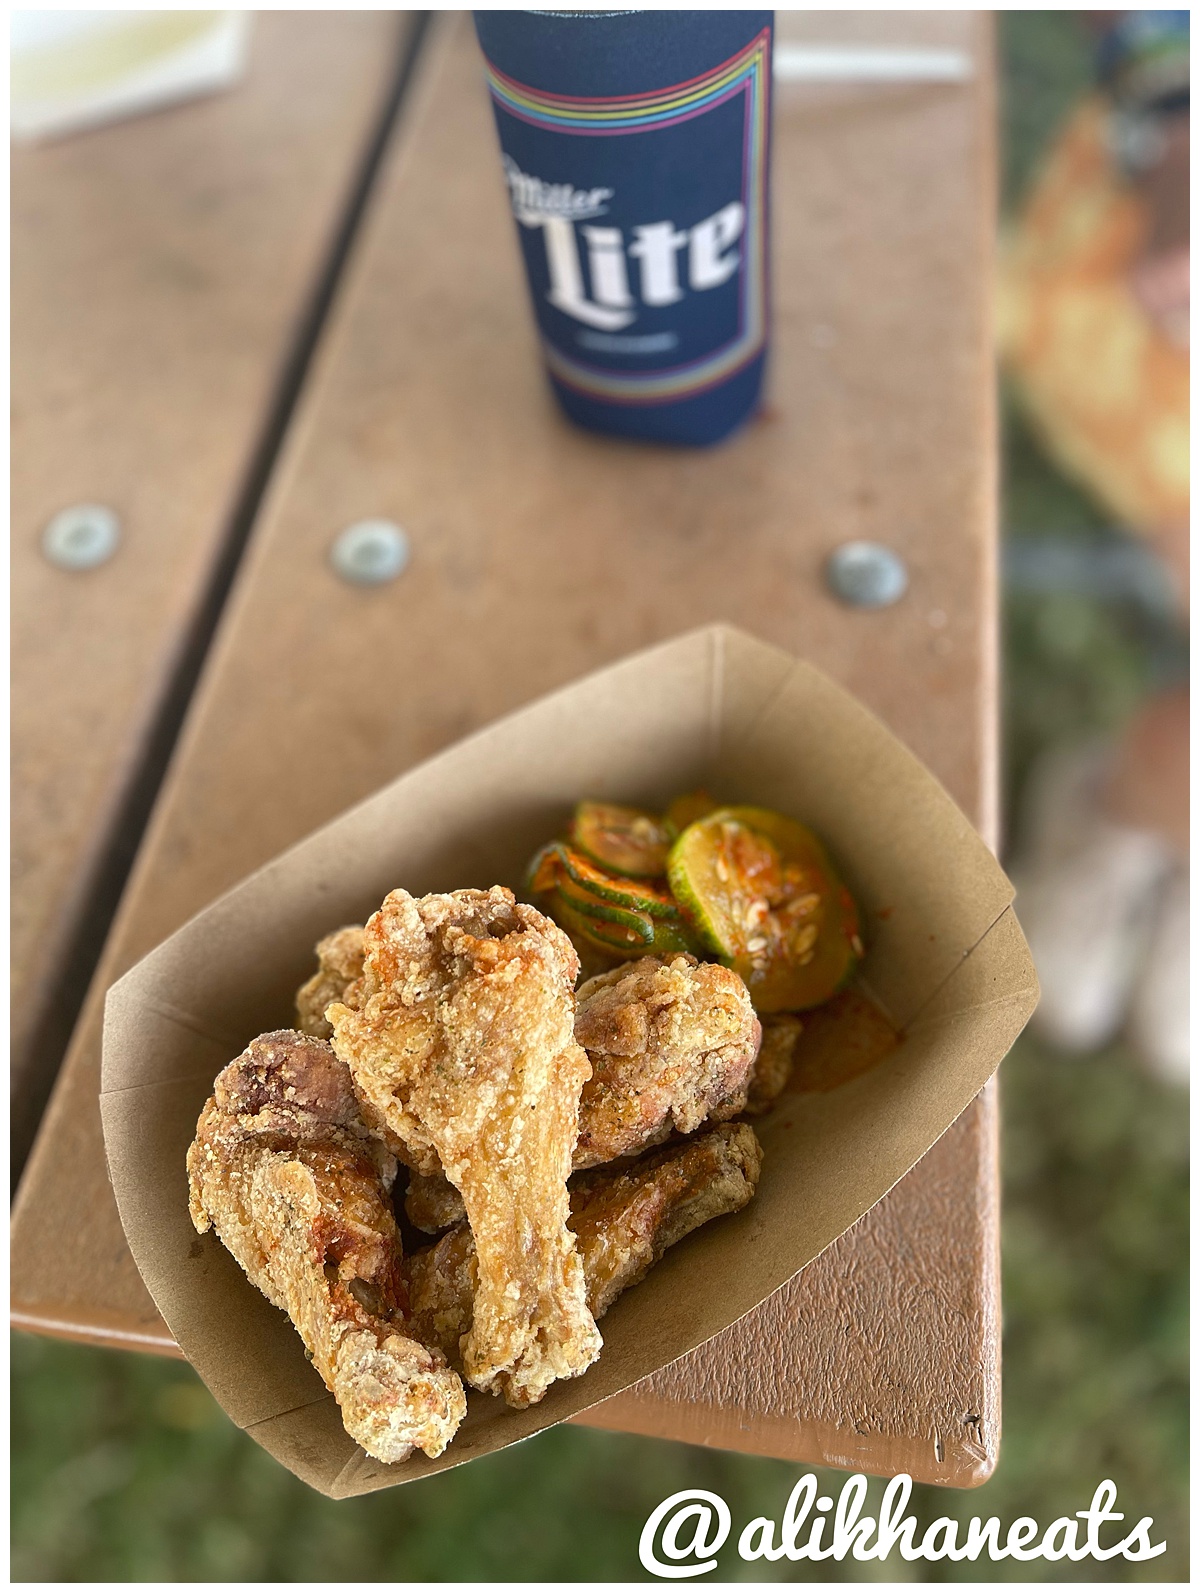 Underdog chicken wings ACL Eats